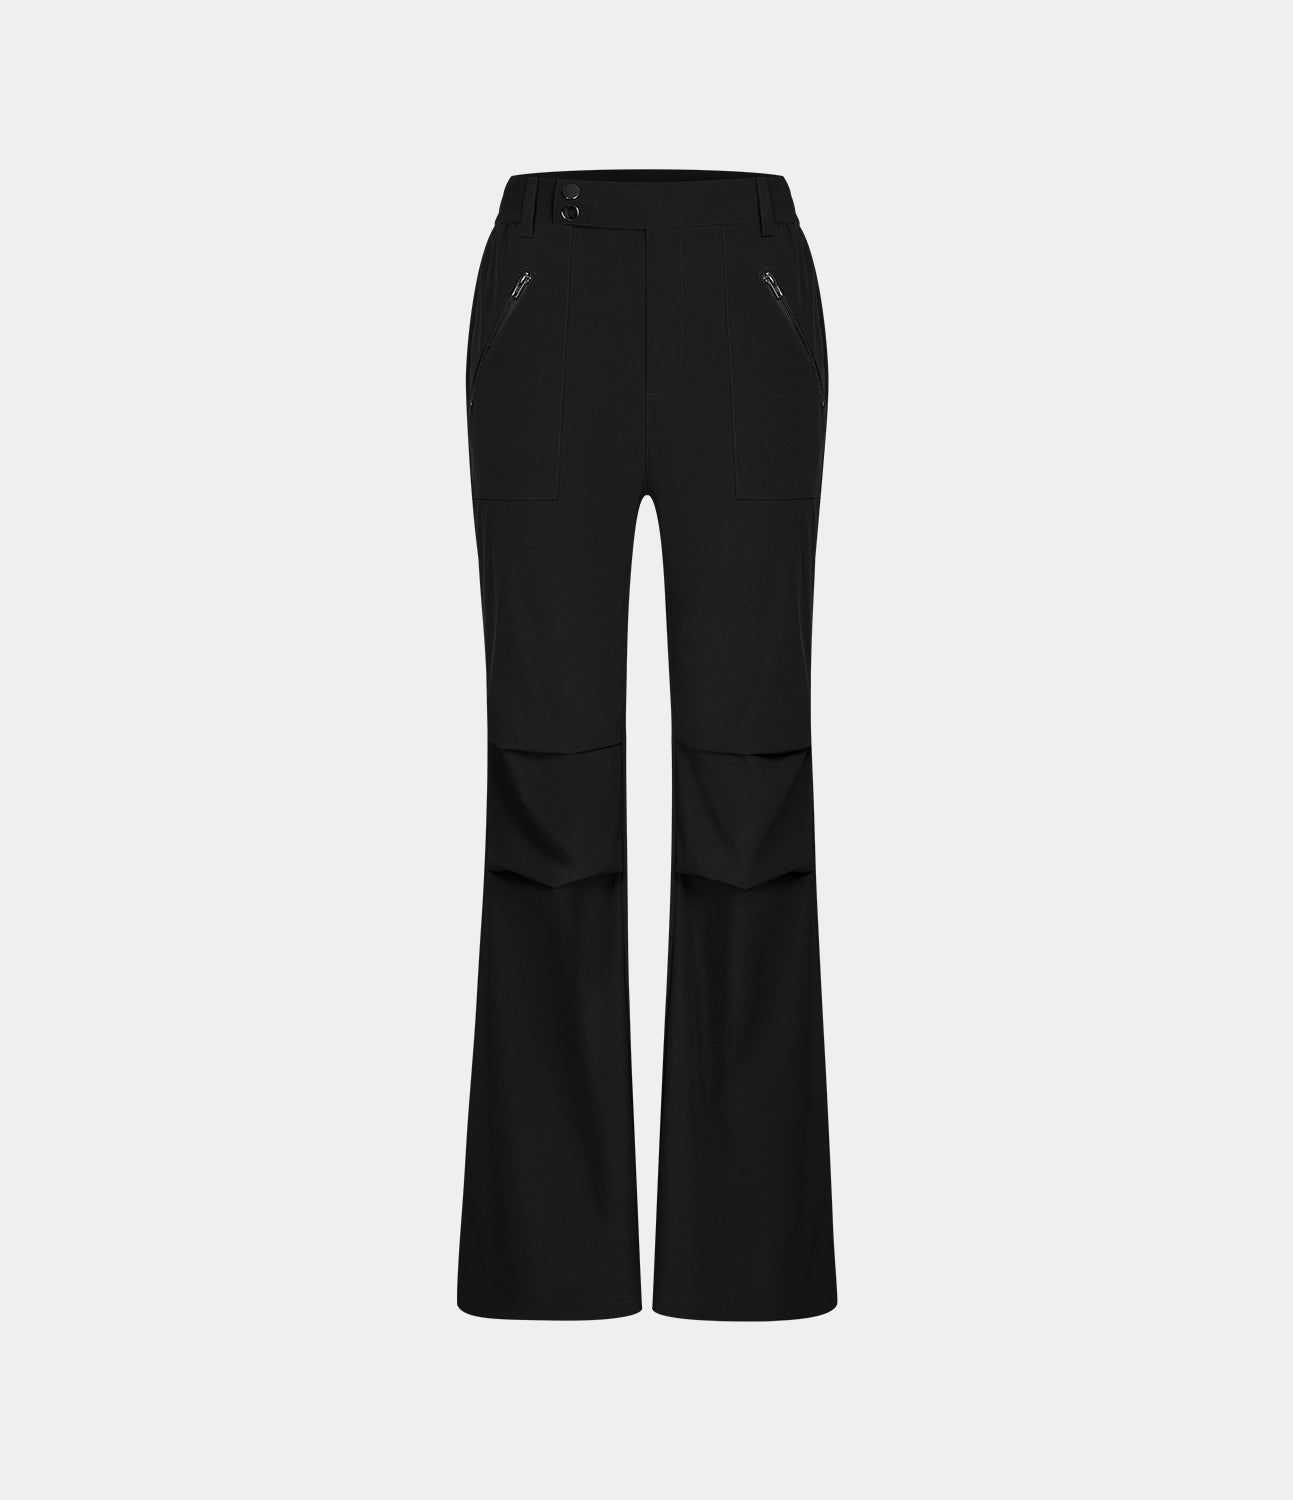 

Halara High Waisted Belted Button Zipper Pocket Flare Casual Cargo Pants - Black -  sweatpants jogger pants stacked sweatpants